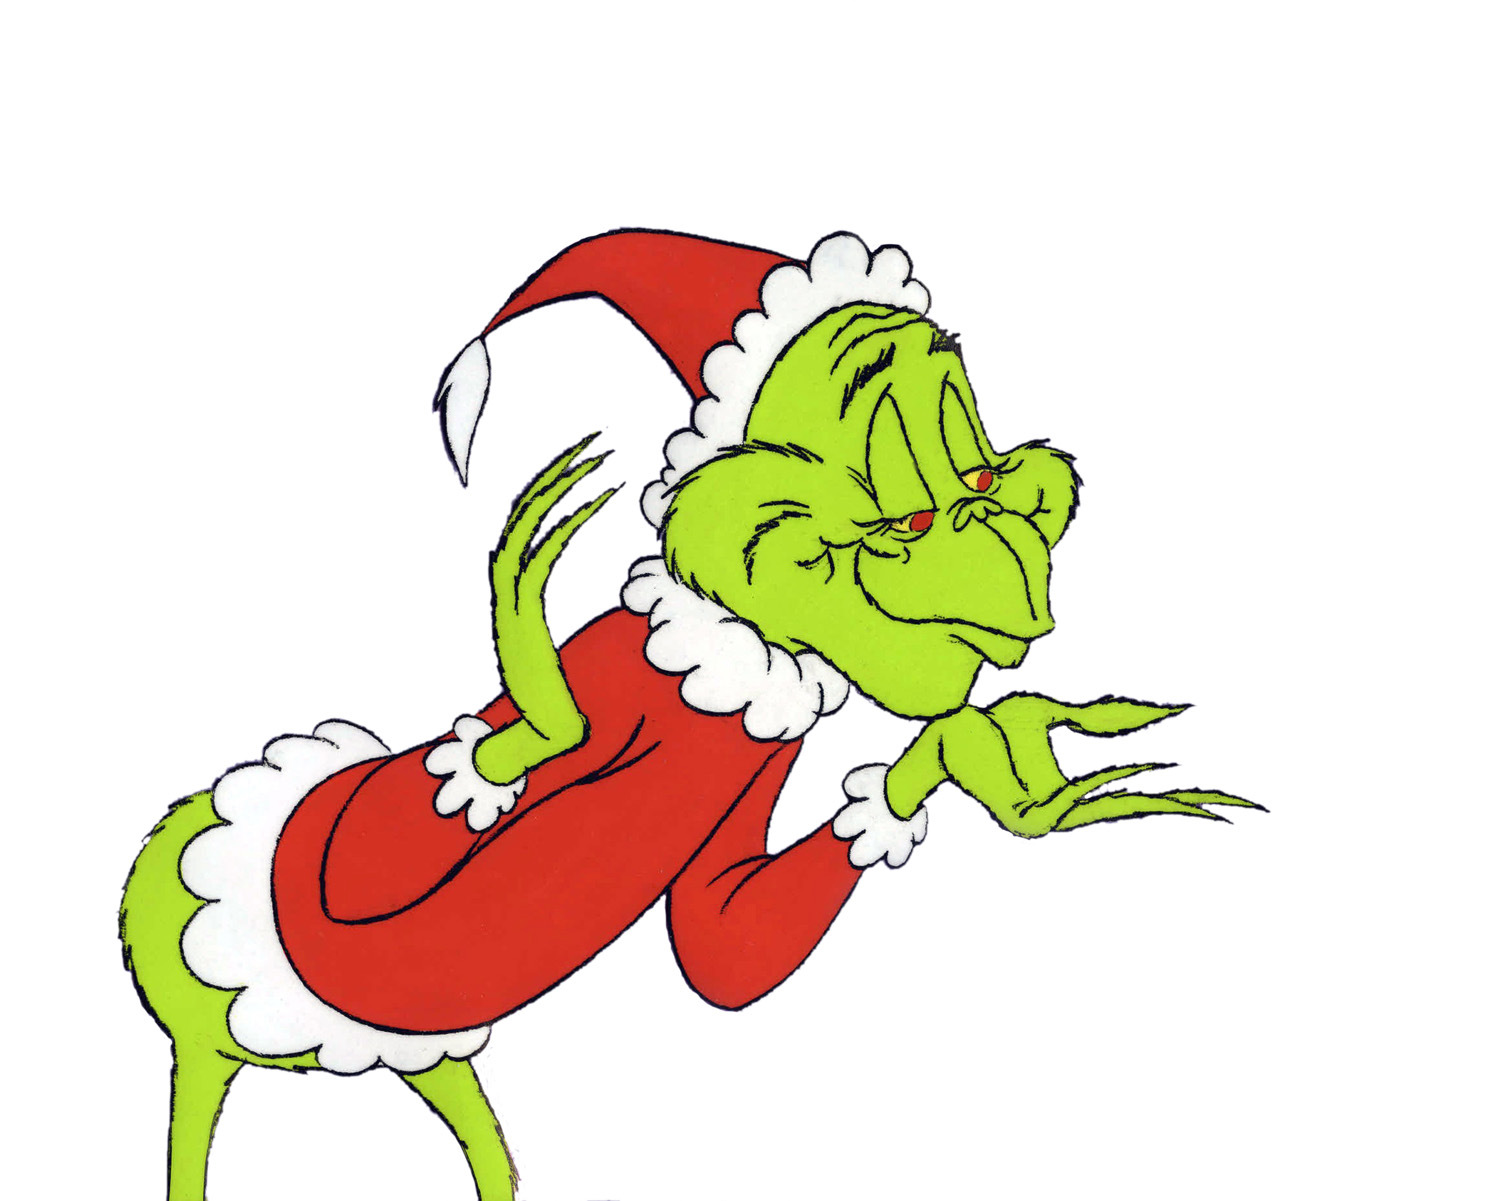 Clip Arts Related To : merry christmas grinch. view all Cartoon Grinch Clip...